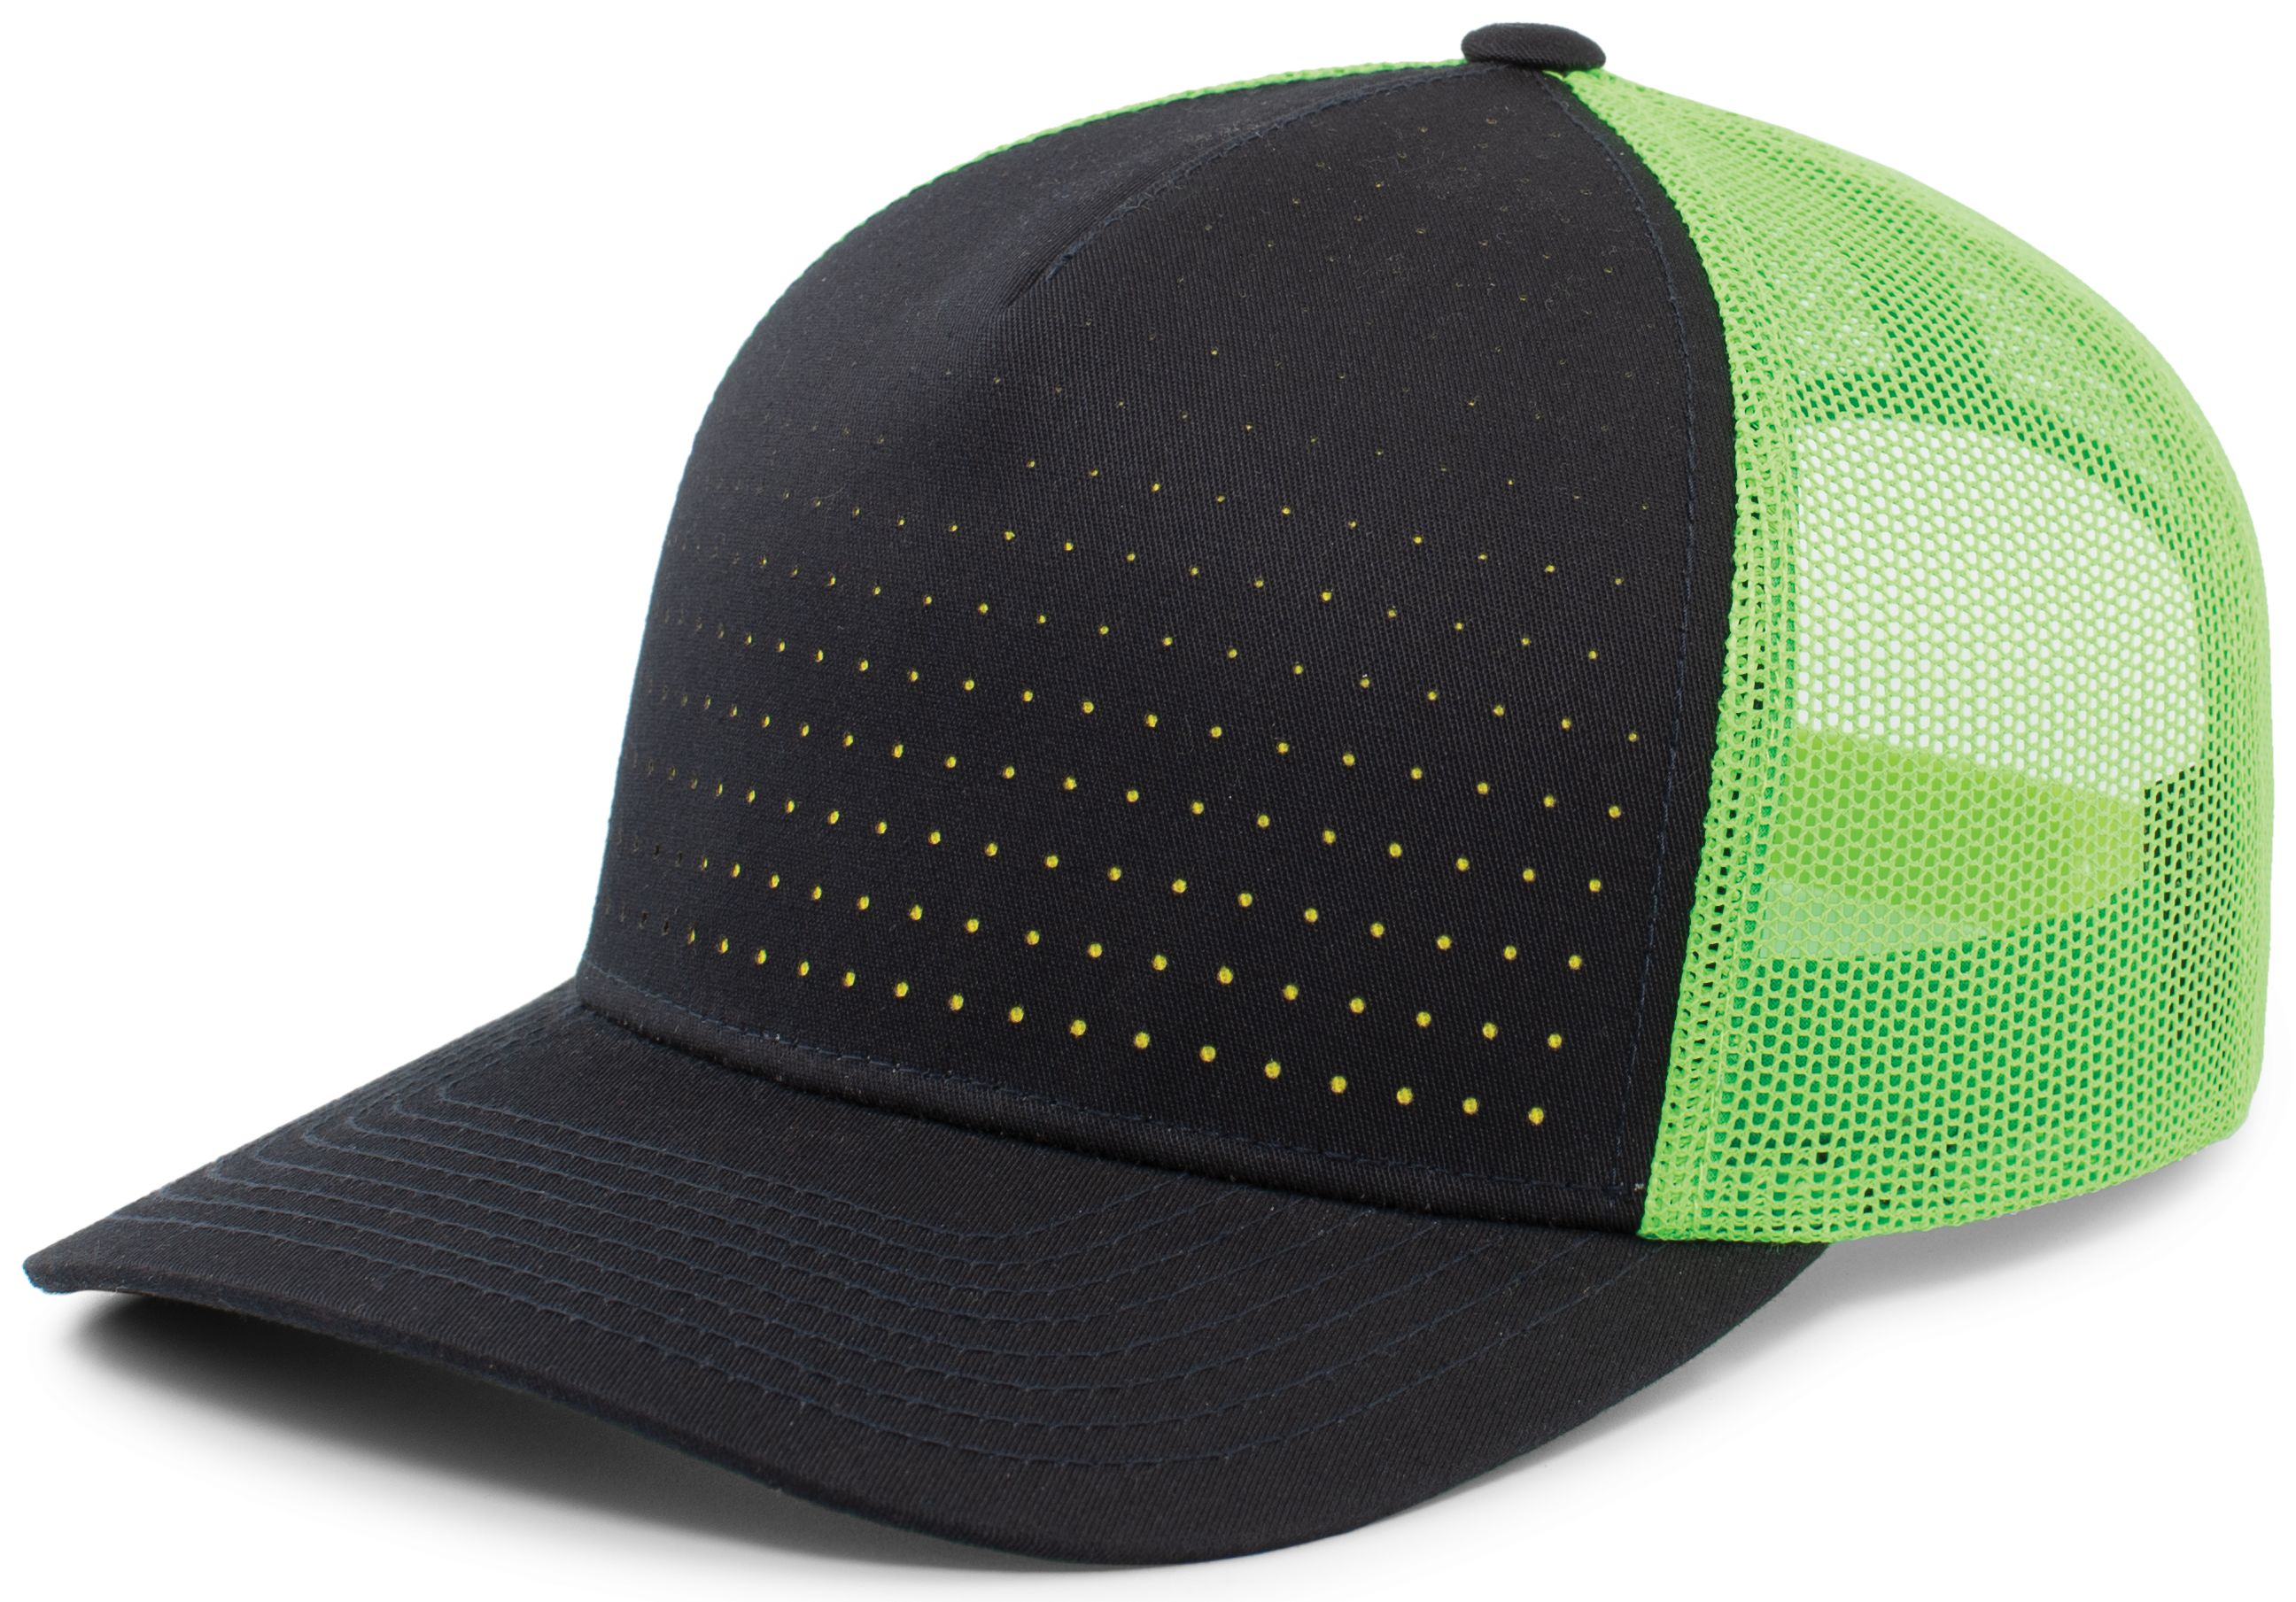 click to view Navy/Neon Green/Navy